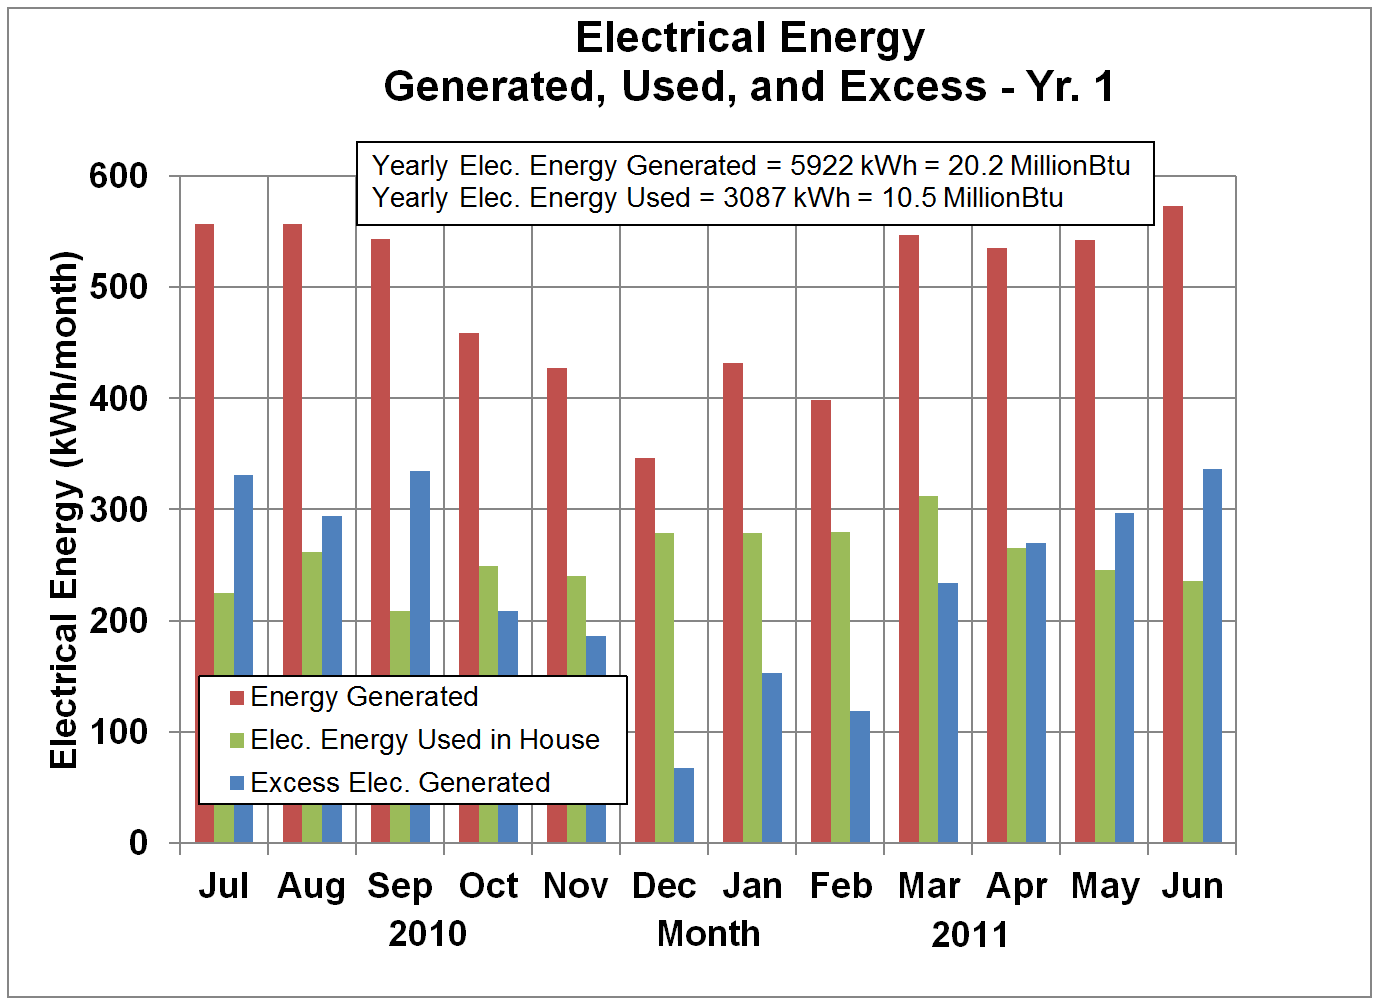 Electrical Energy Generated, Used, and Banked - Yr. 1